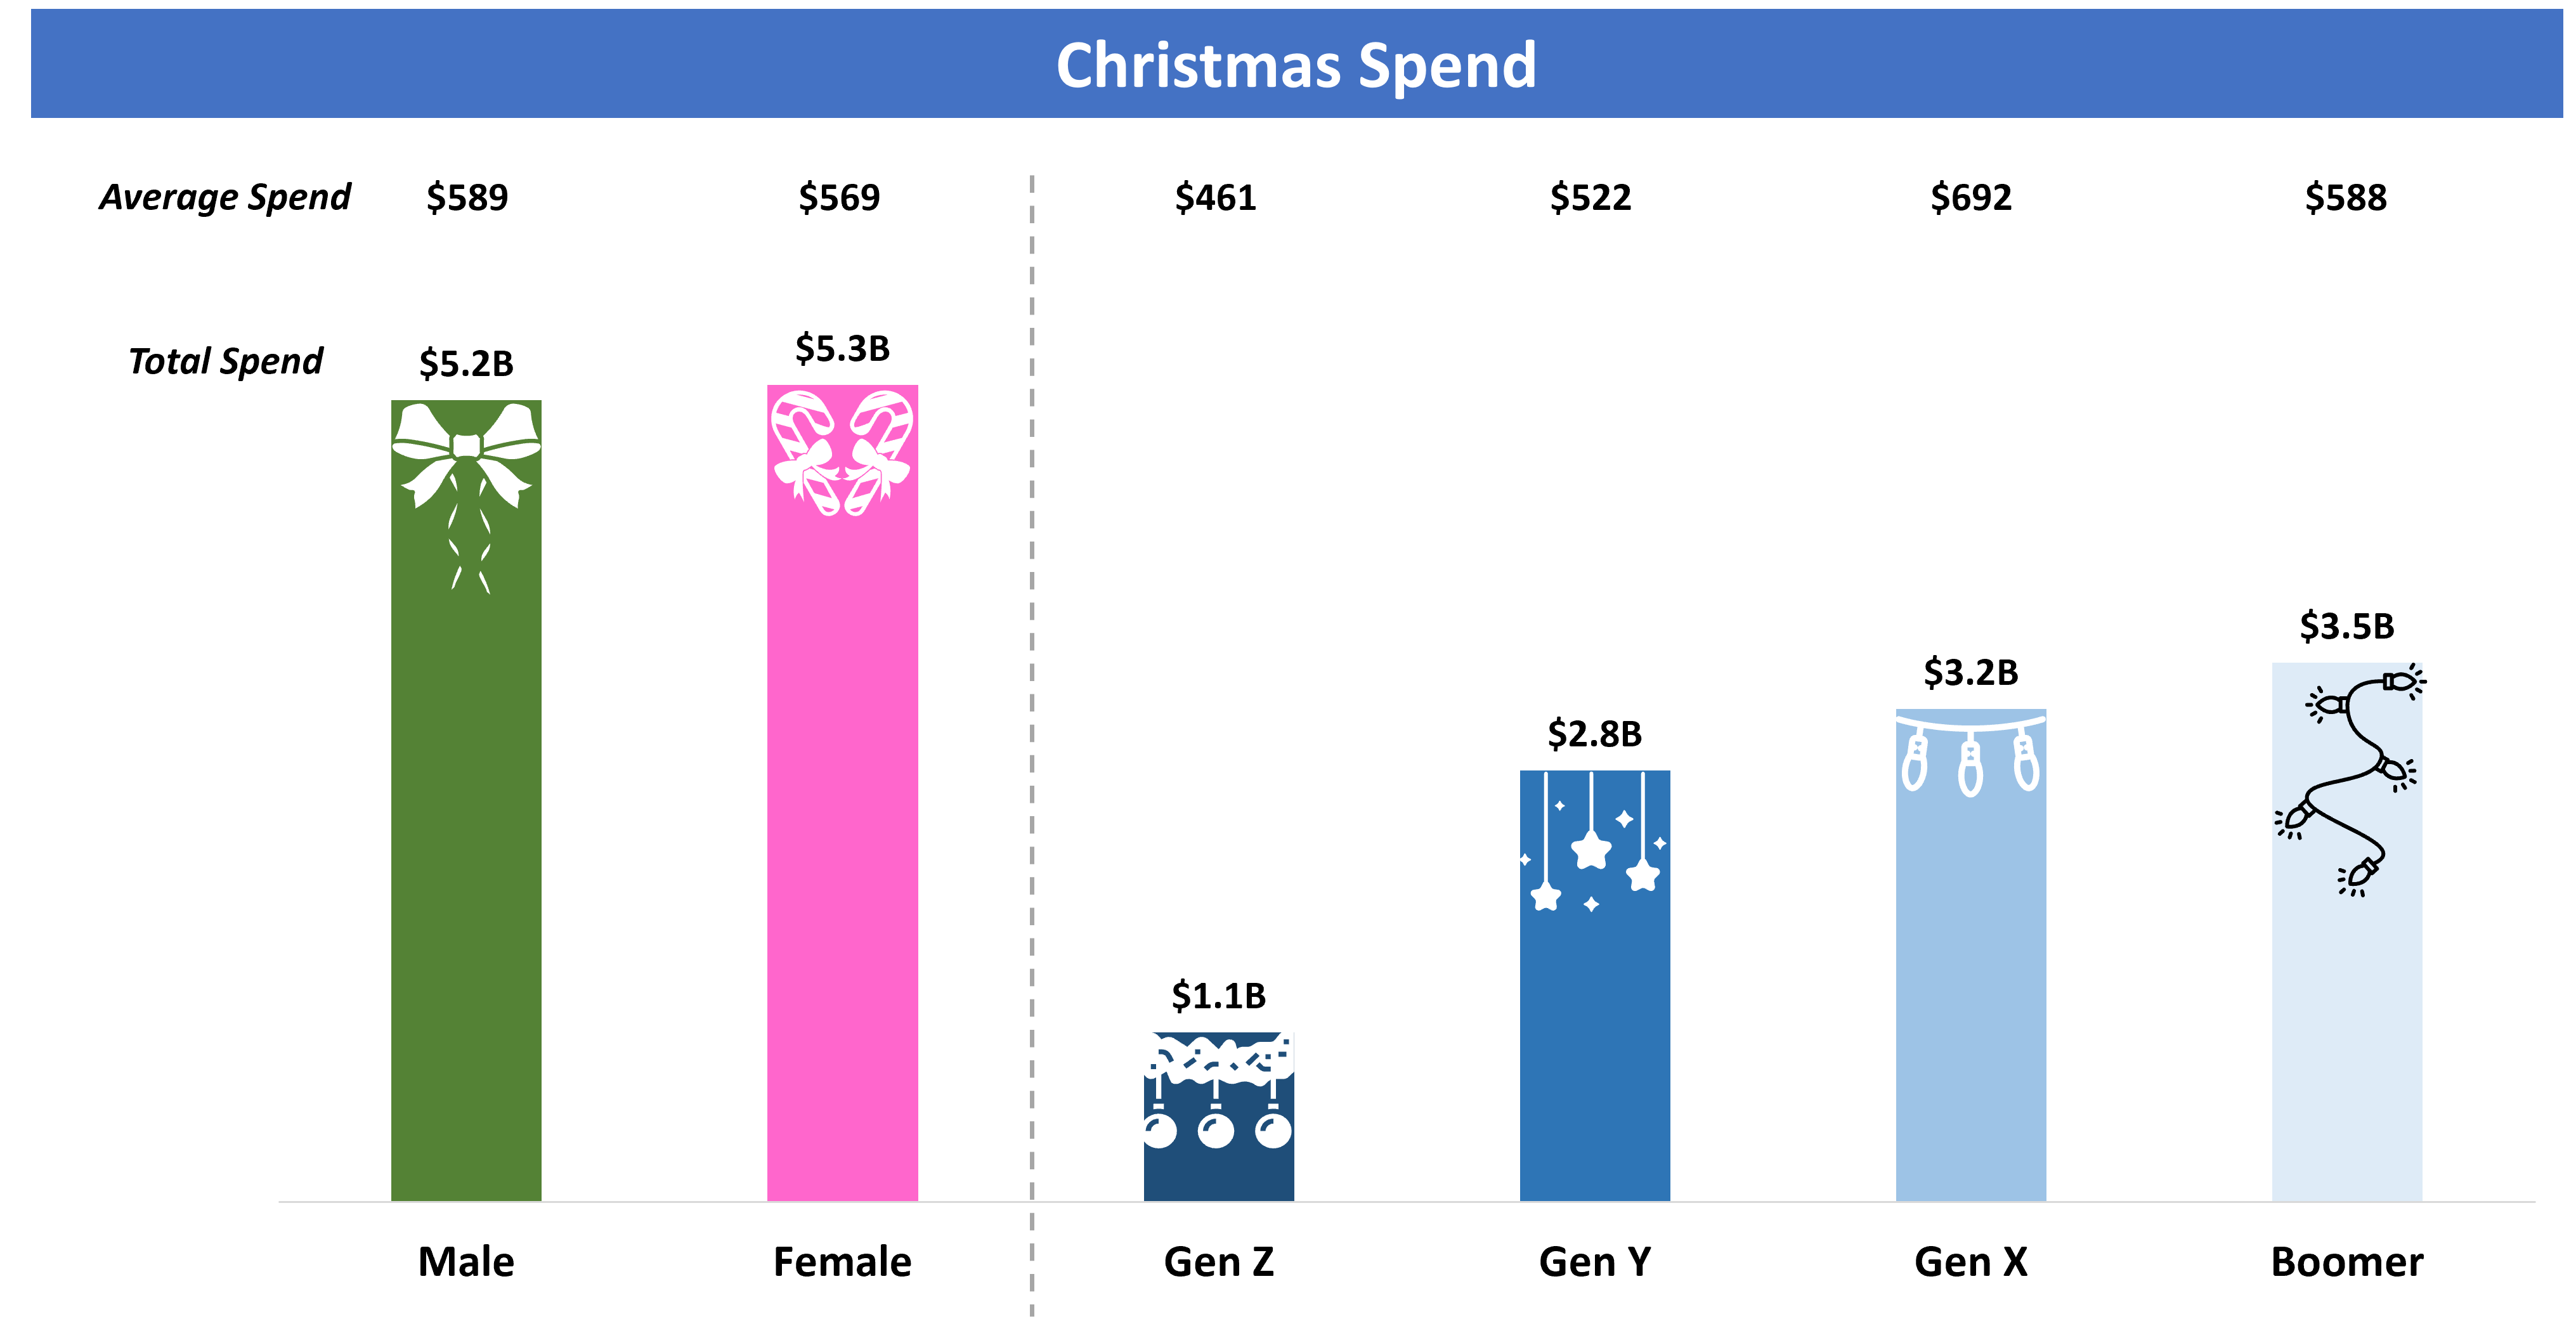 Christmas Spend - Aussies set to spend $10.5 billion on Christmas gifts despite cost-of-living crisis